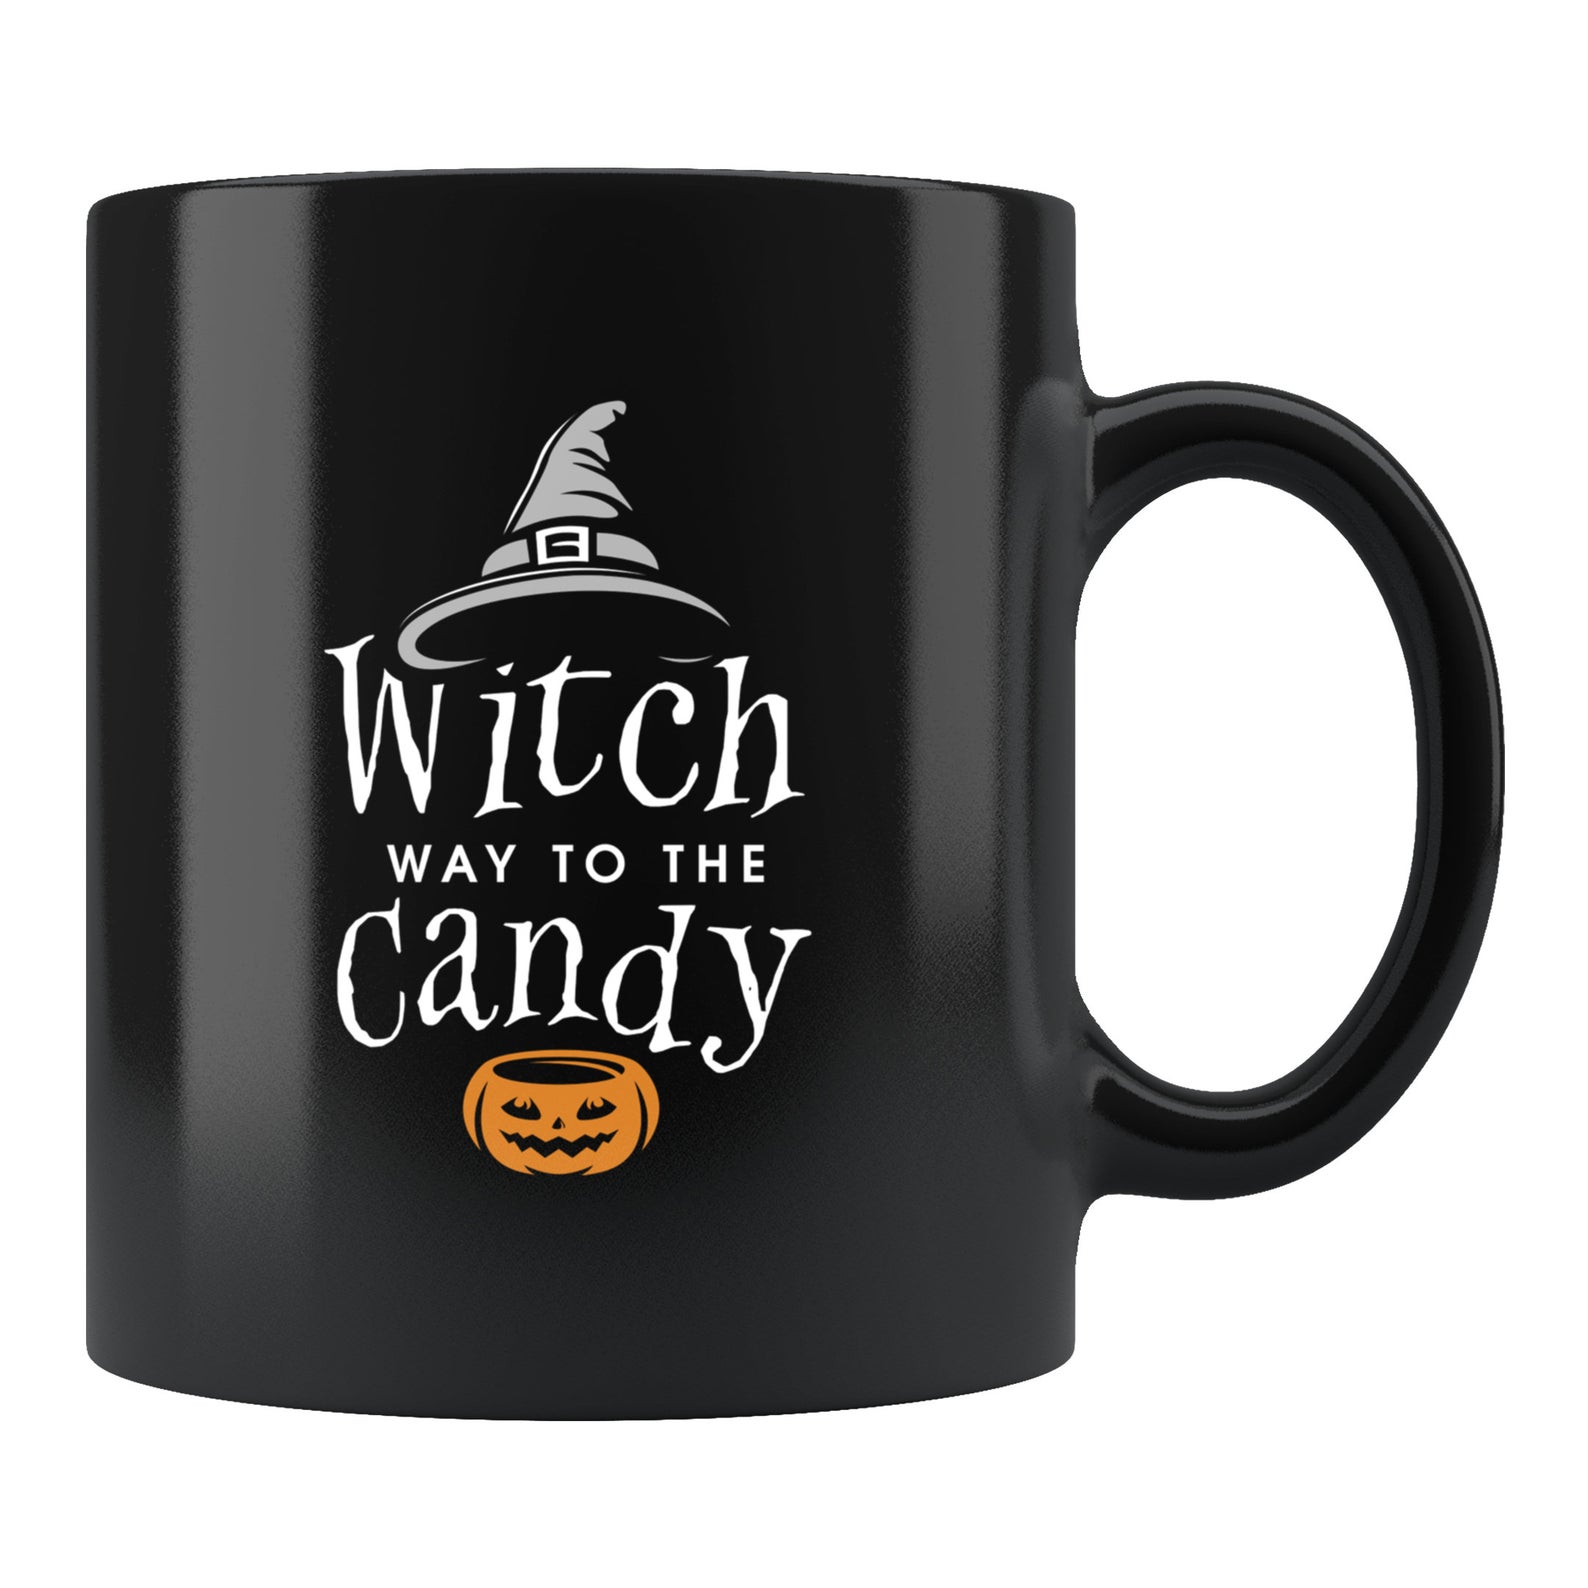 31 Spooky Halloween Mugs For Your Daily Brews - Perhaps, Maybe Not